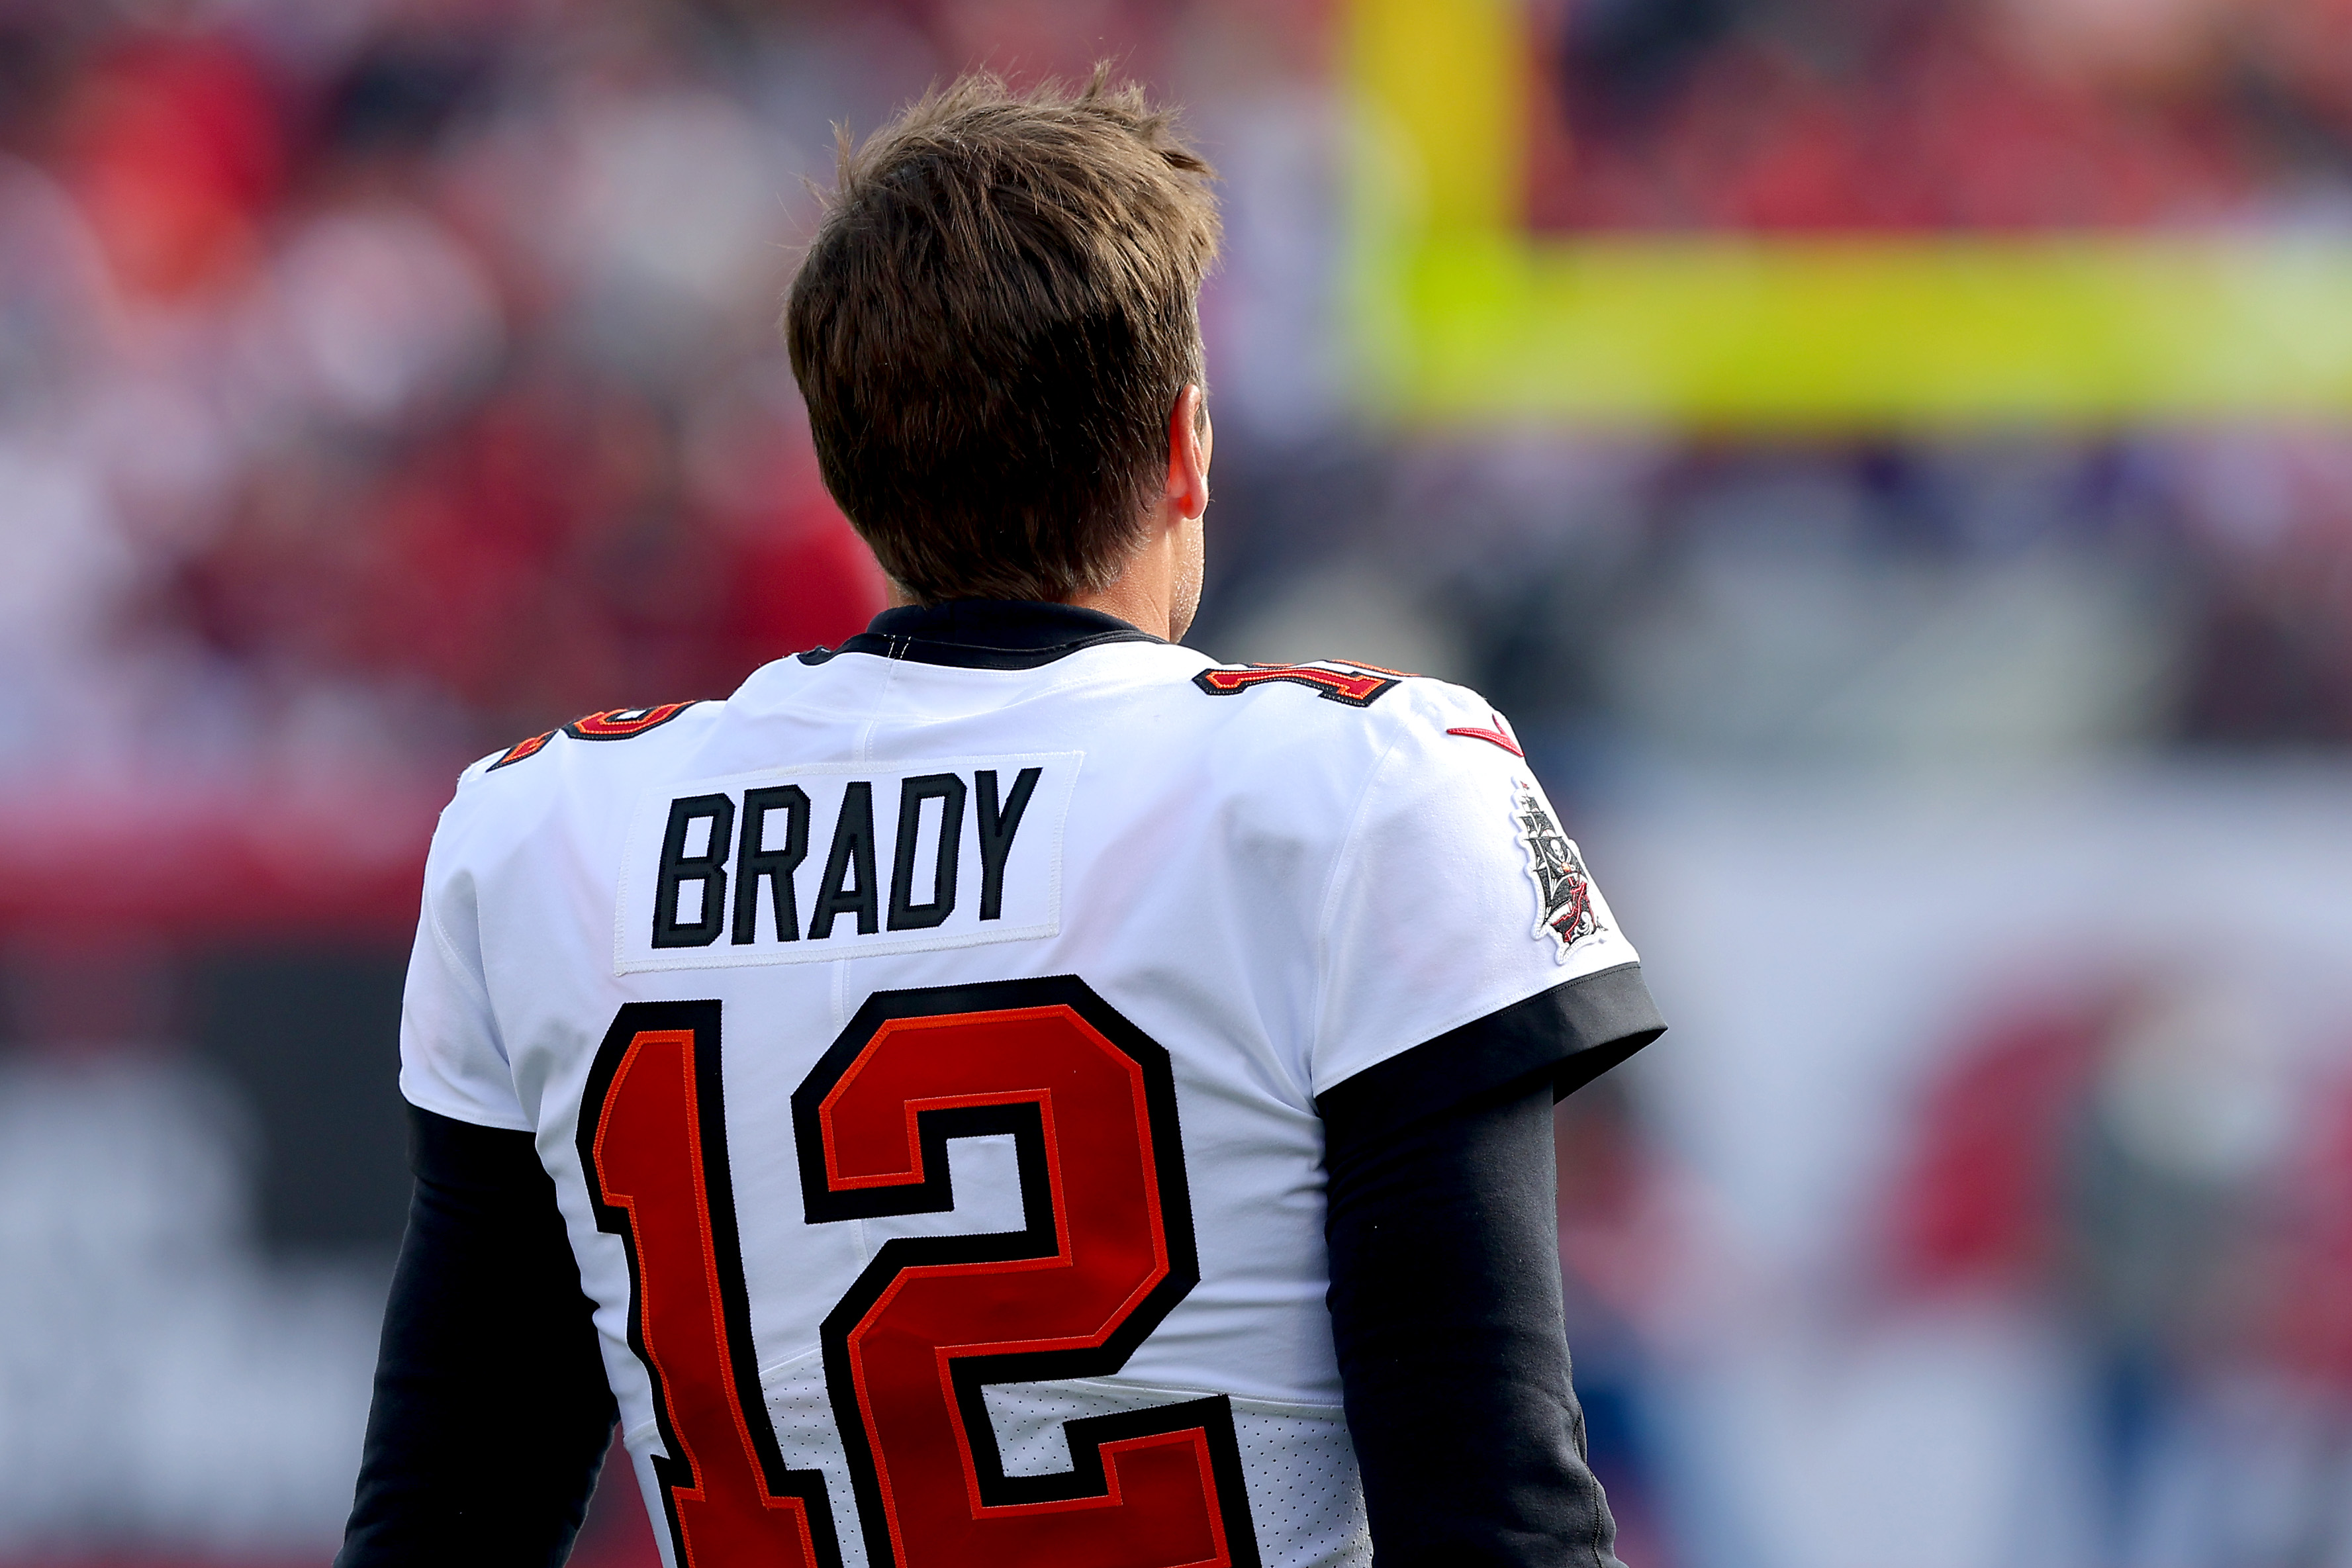 Tom Brady #12 of the Tampa Bay Buccaneers looks on before the game against the Los Angeles Rams in the NFC Divisional Playoff game at Raymond James Stadium on January 23, 2022 in Tampa, Florida.